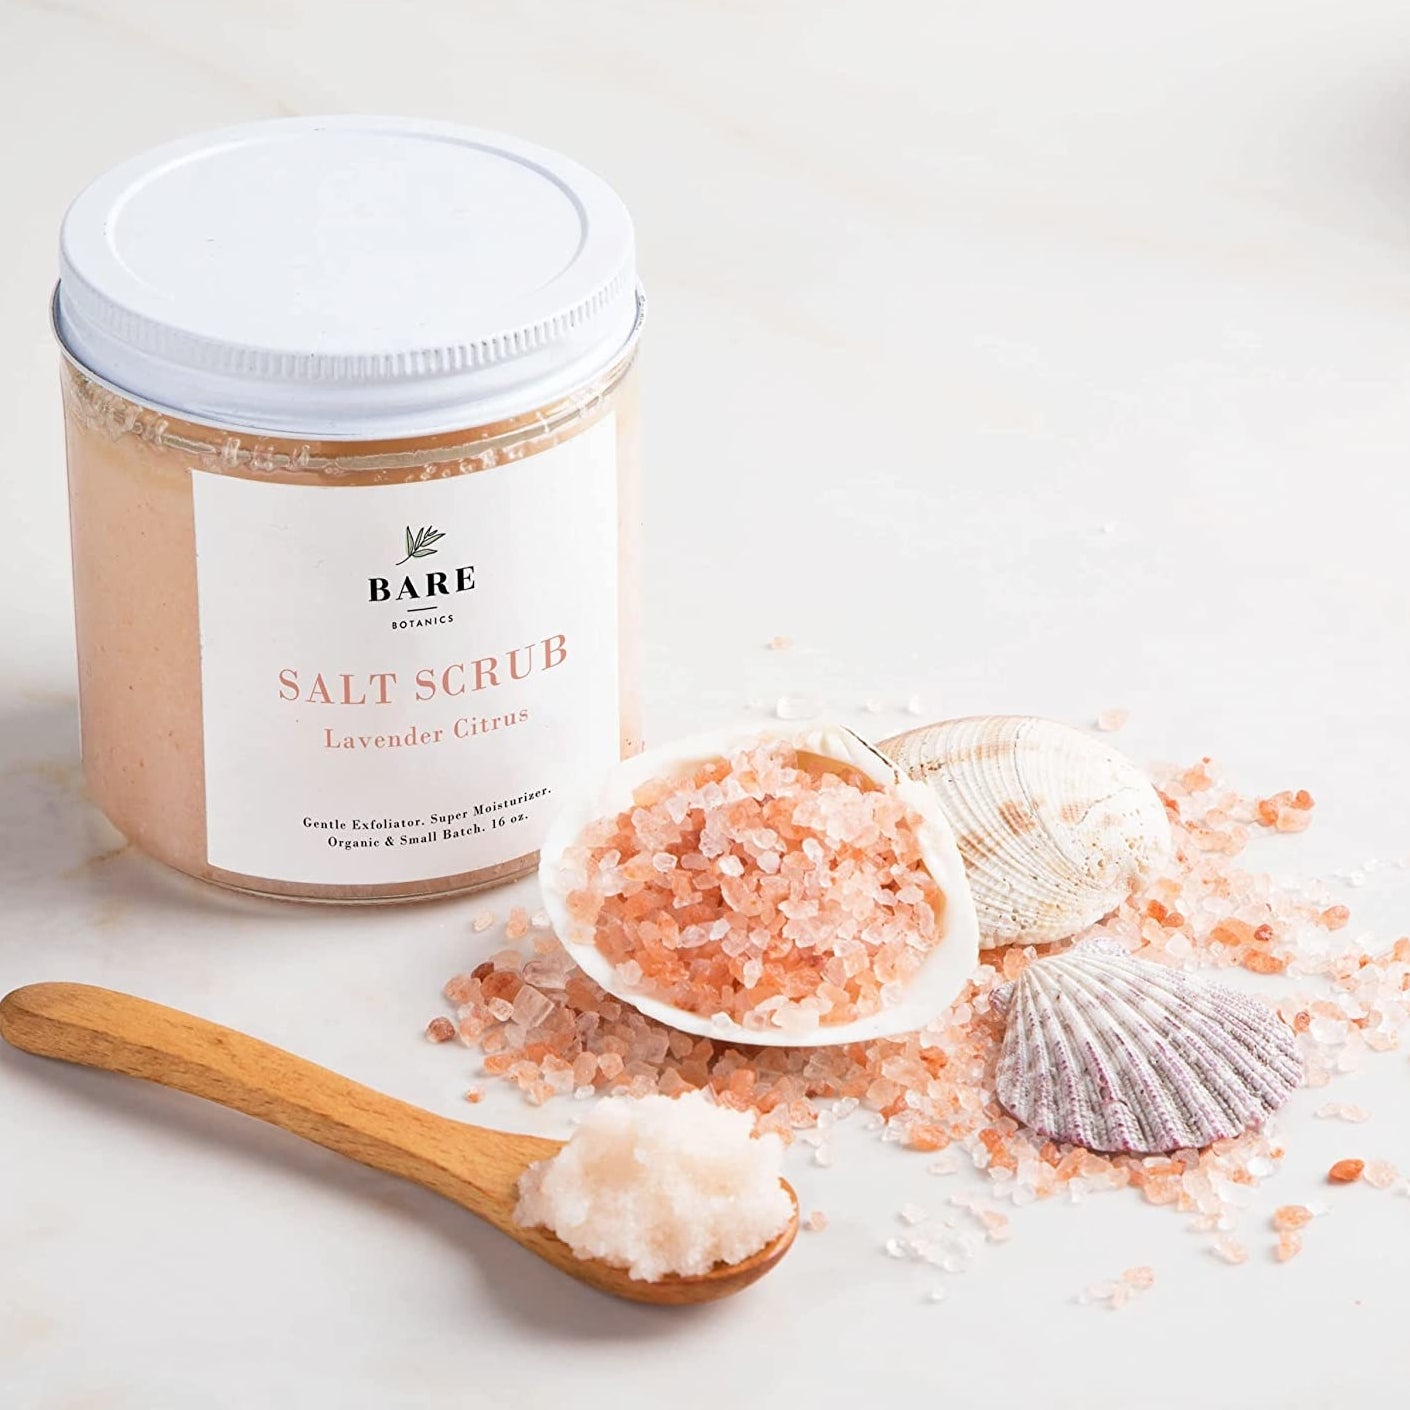 the tub of salt scrub next to a seashell full of pink salt and a spoon of the scrub